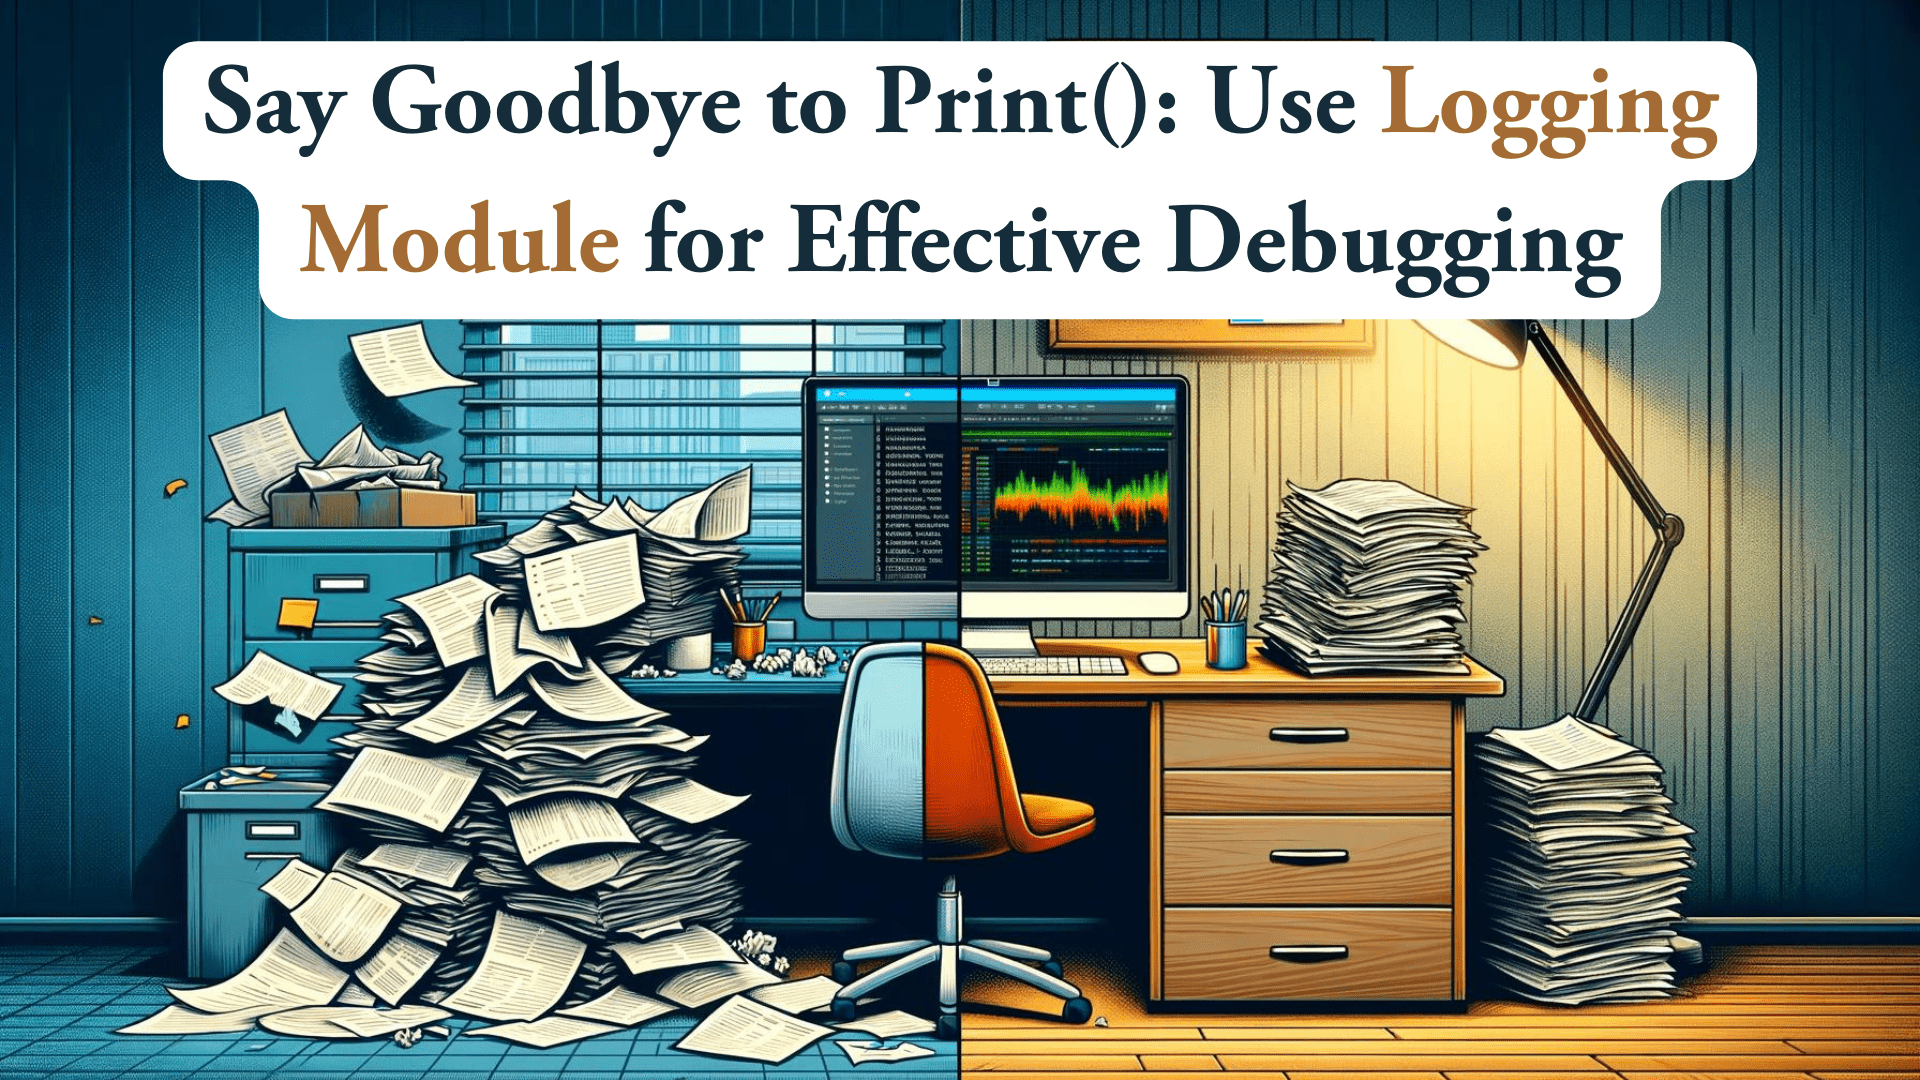 Say Goodbye to Print(): Use Logging Module for Efficient Debugging